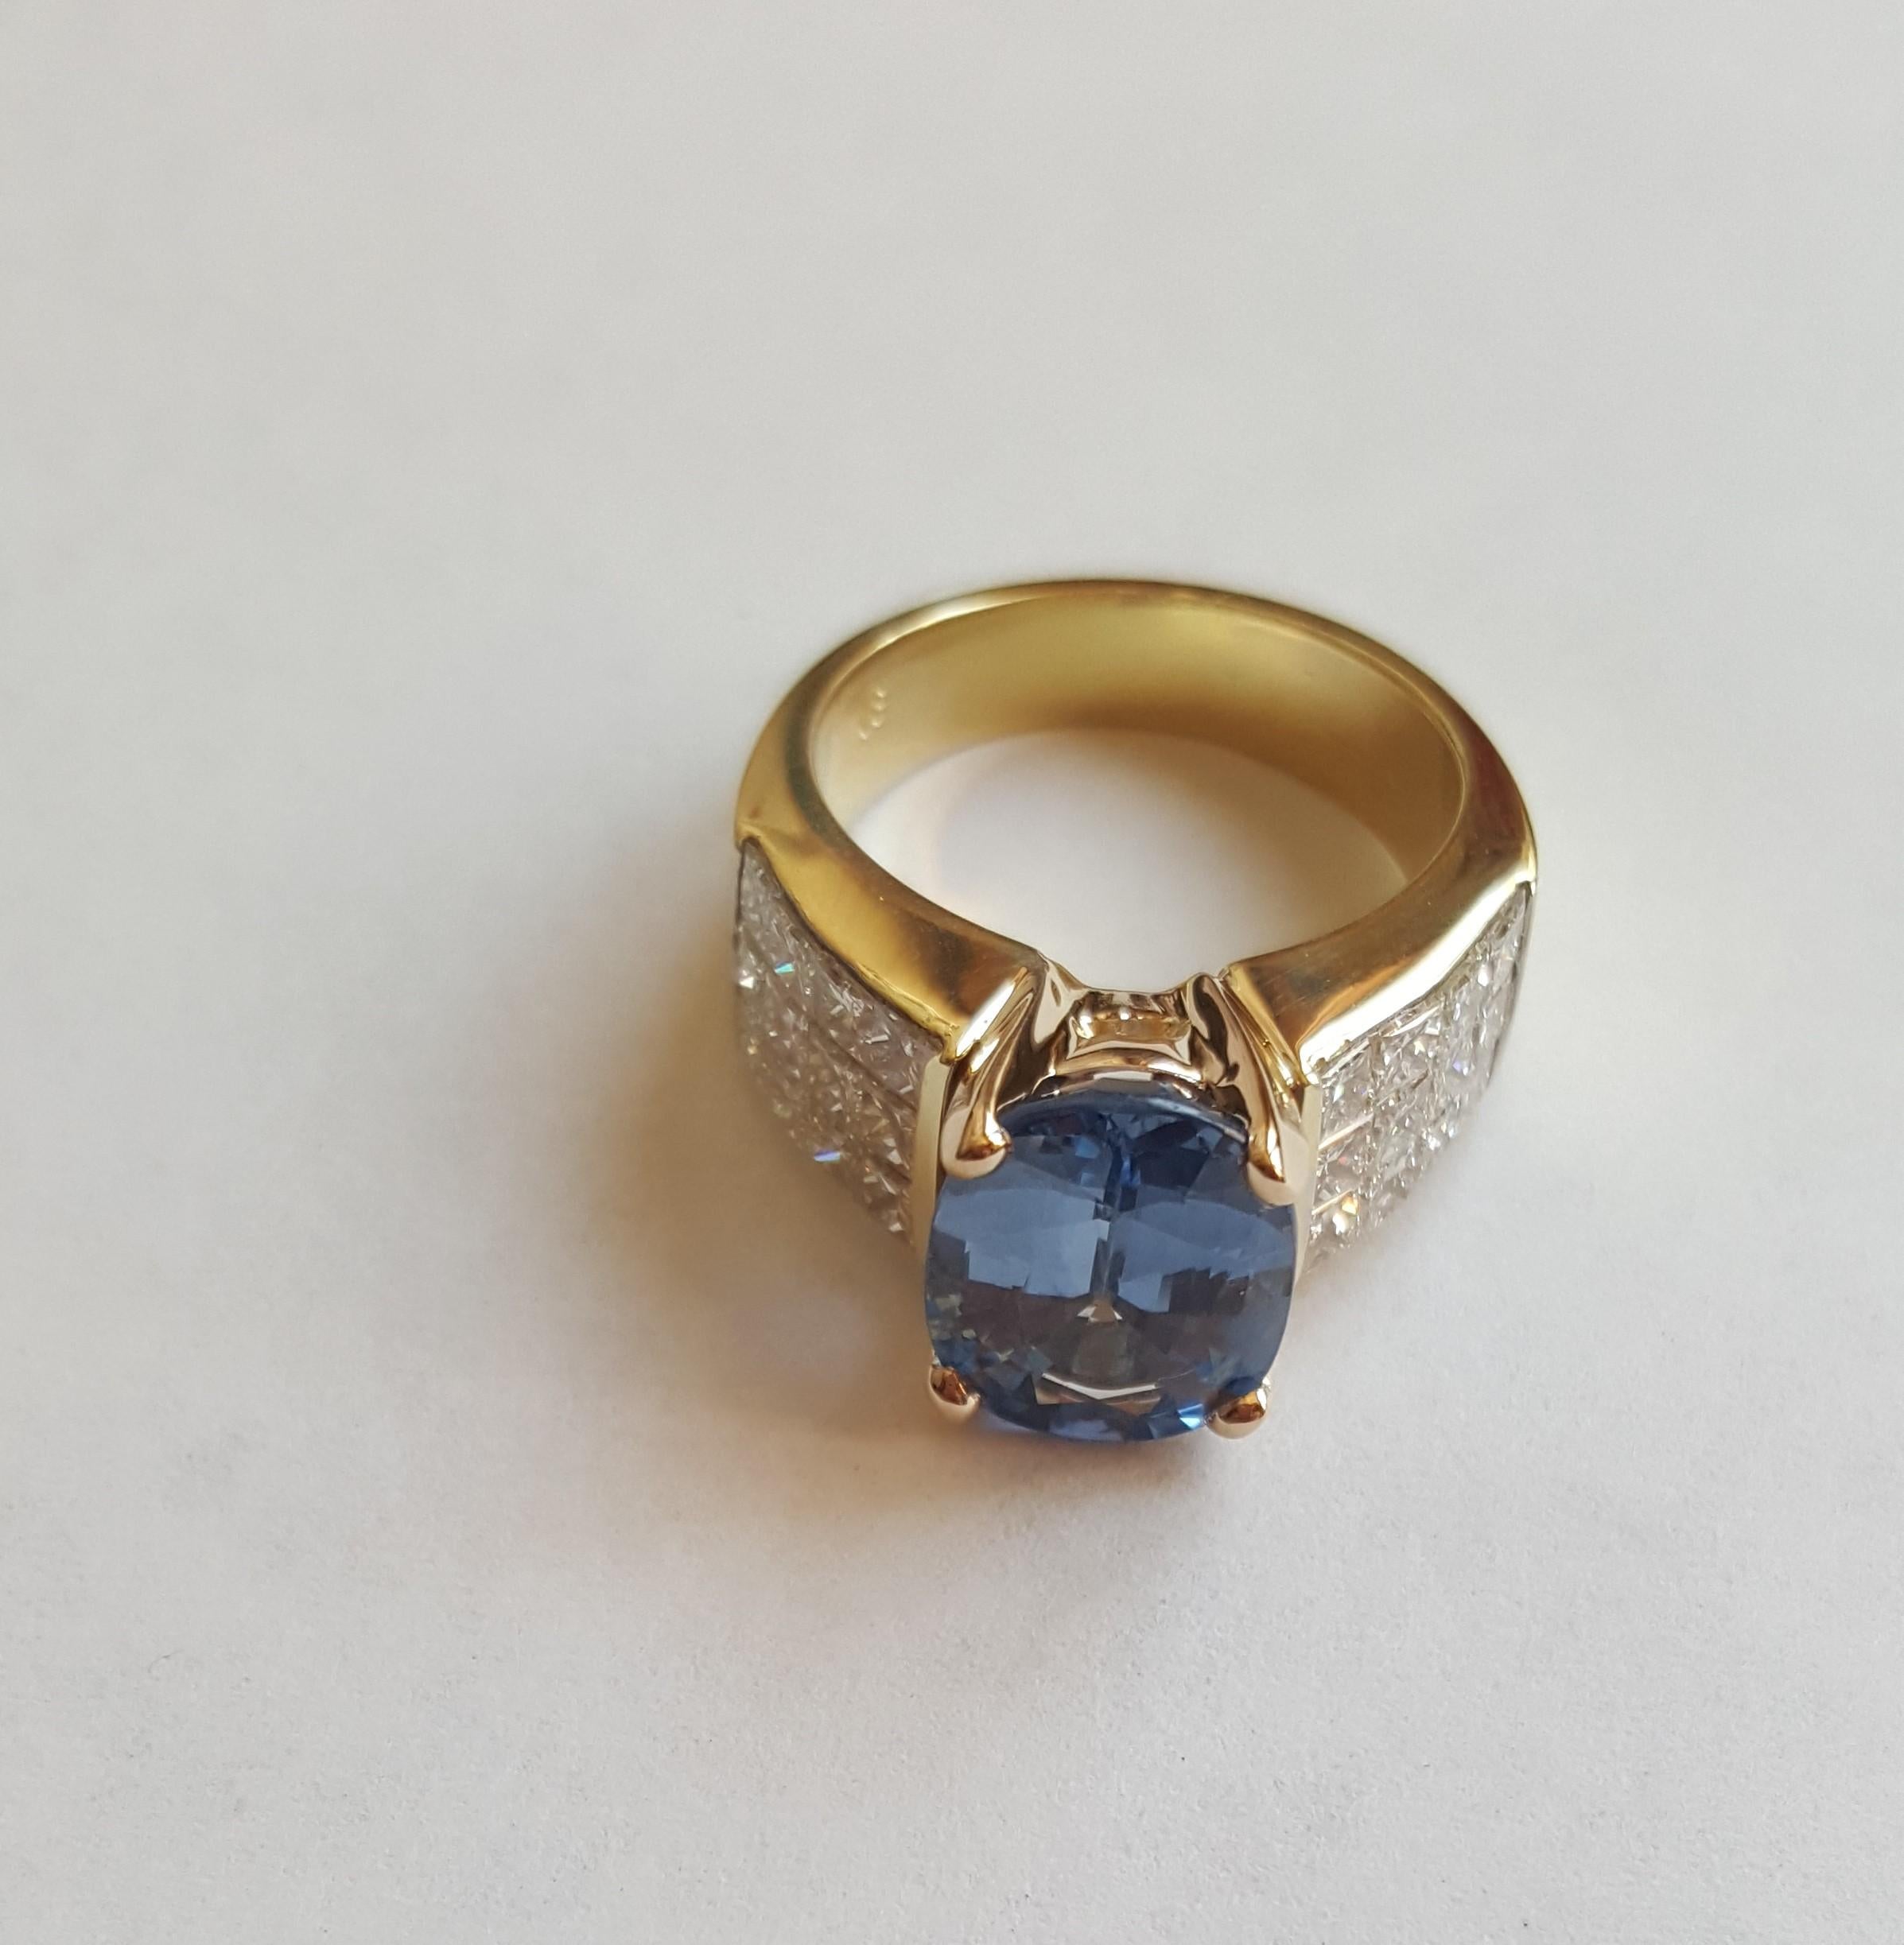 18kt Yellow Gold Oval 4.45ct Blue Sapphire Ring with 24 Princess Cut Invisible Set Diamonds. The blue sapphire is 11.4mm x 8.6 mm in diameter and has a nice medium blue cornflower color, a very clean stone, set in a 4-prong basket style setting. 